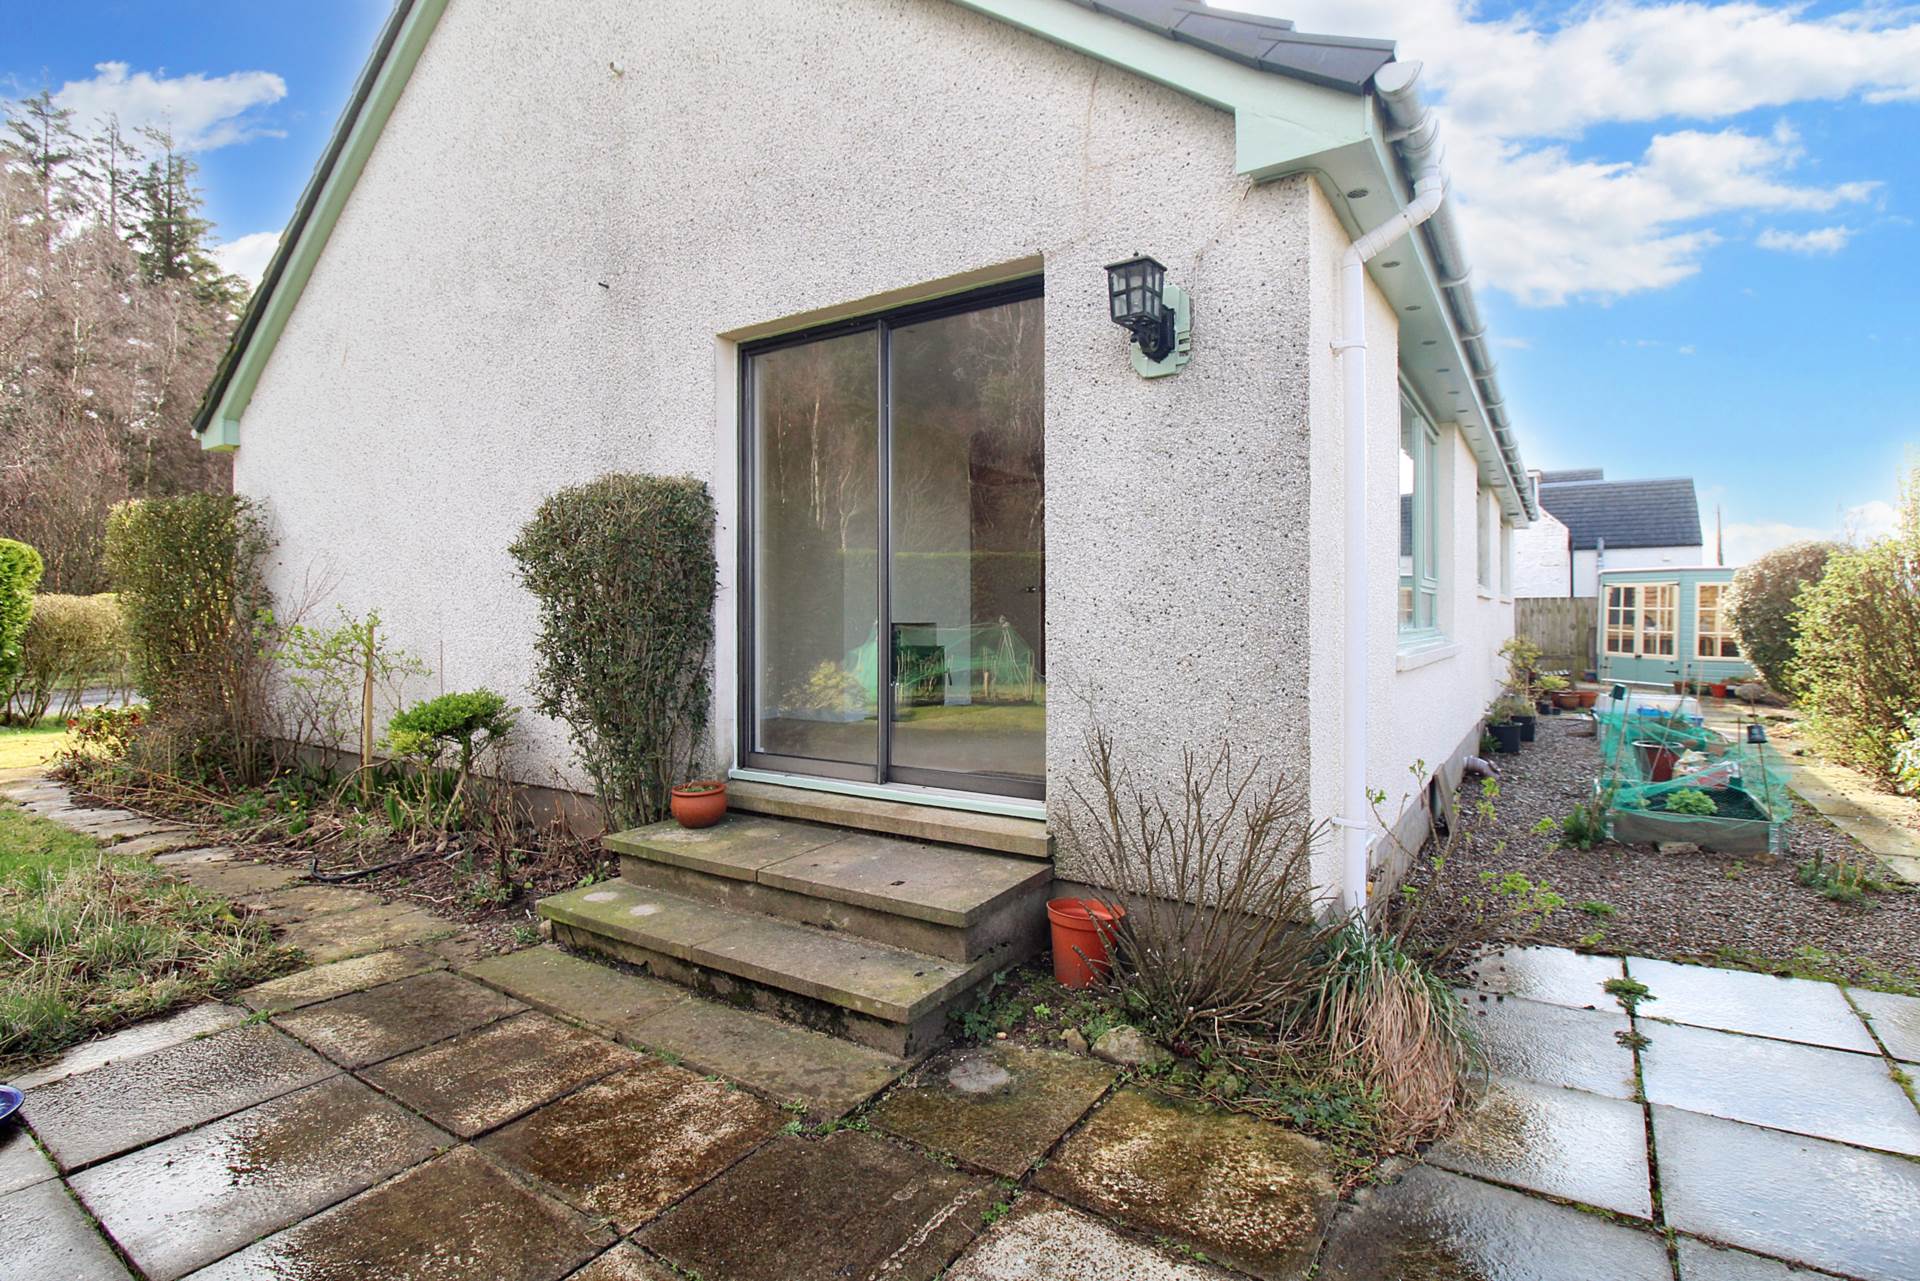 CLOSING DATE SET FRIDAY 12 APRIL 12PM Meikle Urchany, Nairn, Image 22